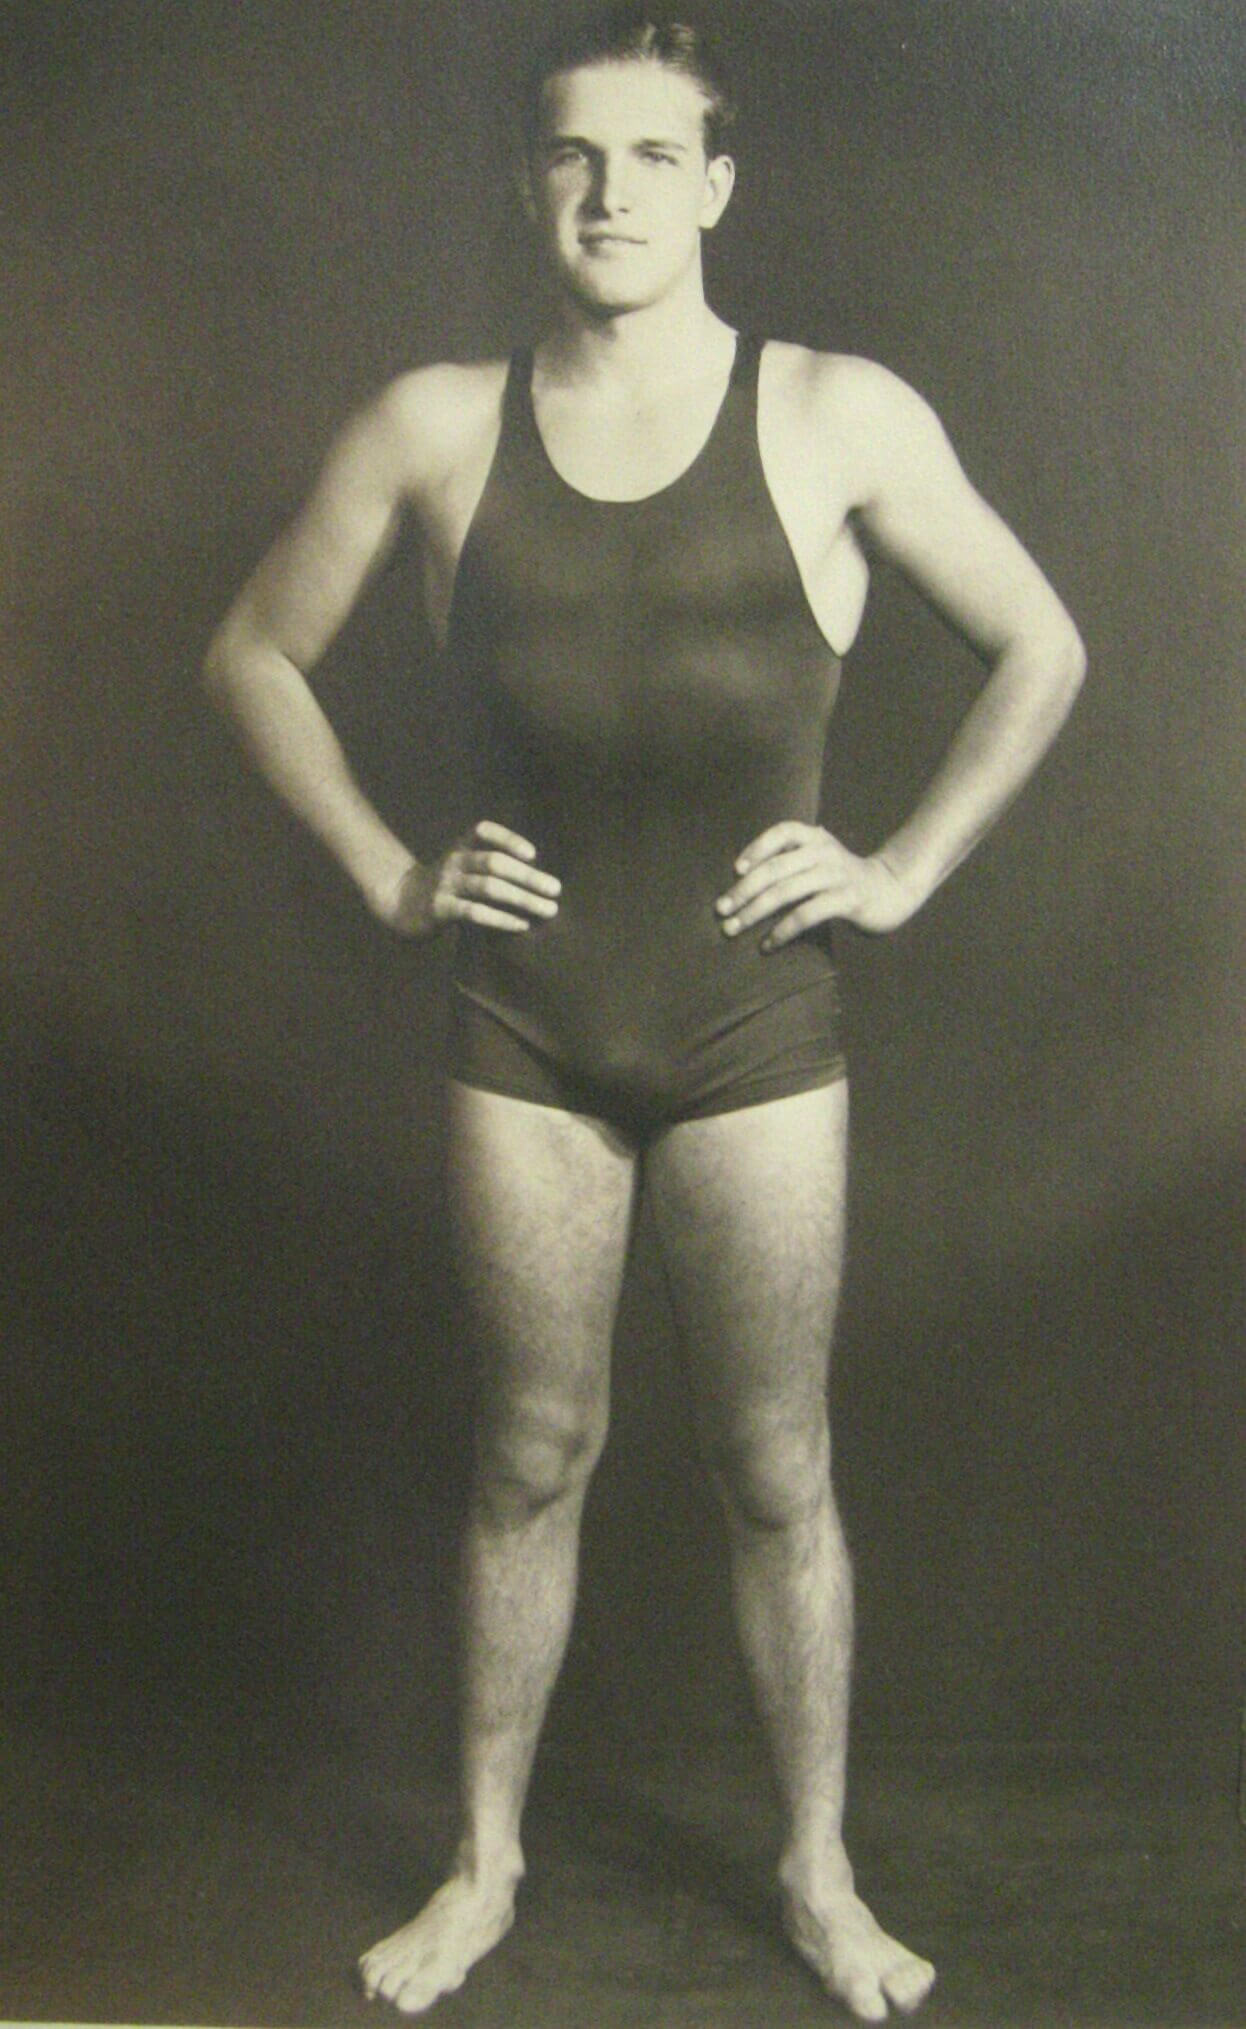 Adolph Kiefer 1936 Olympic Gold